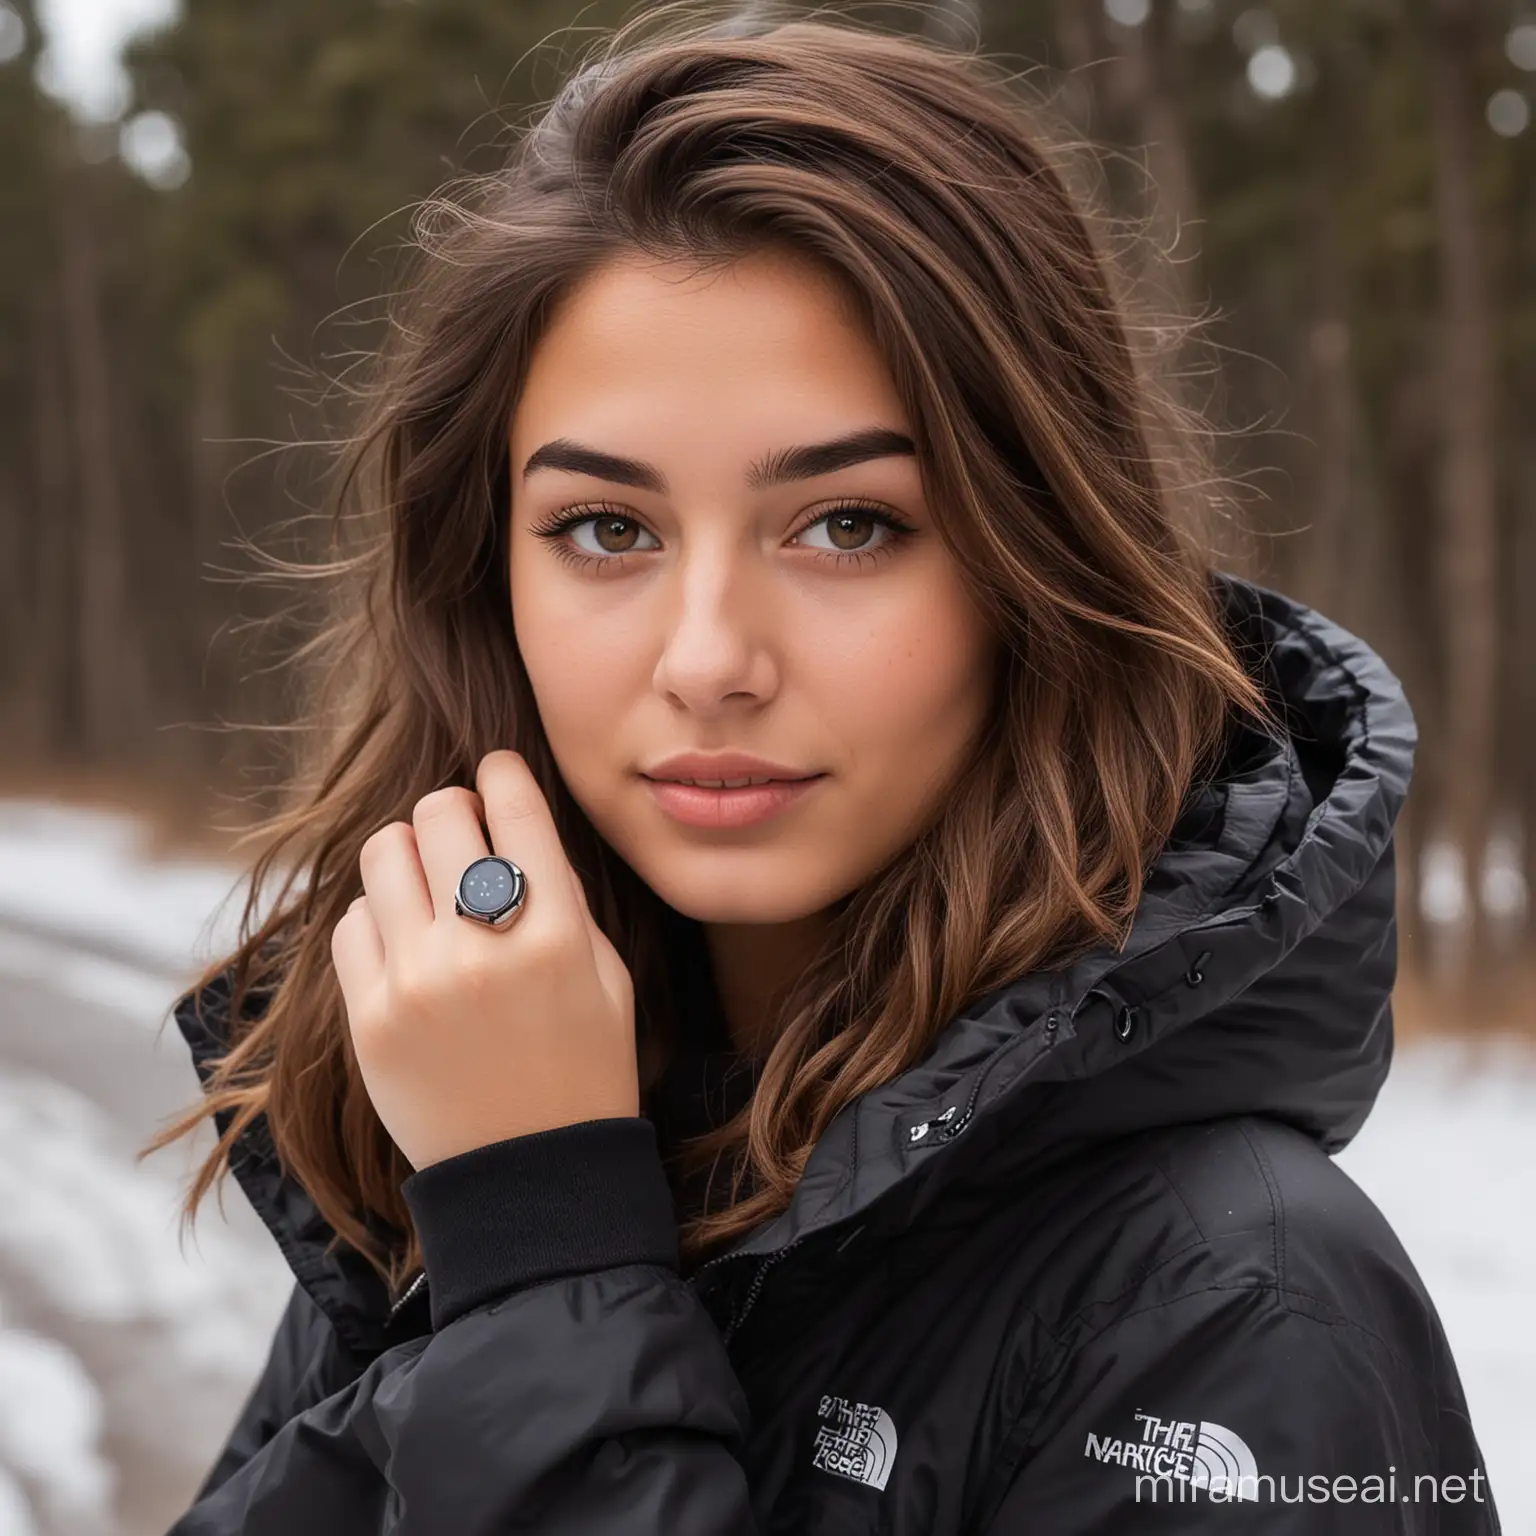 Stylish 21YearOld Woman in Black Parka with Apple Watch